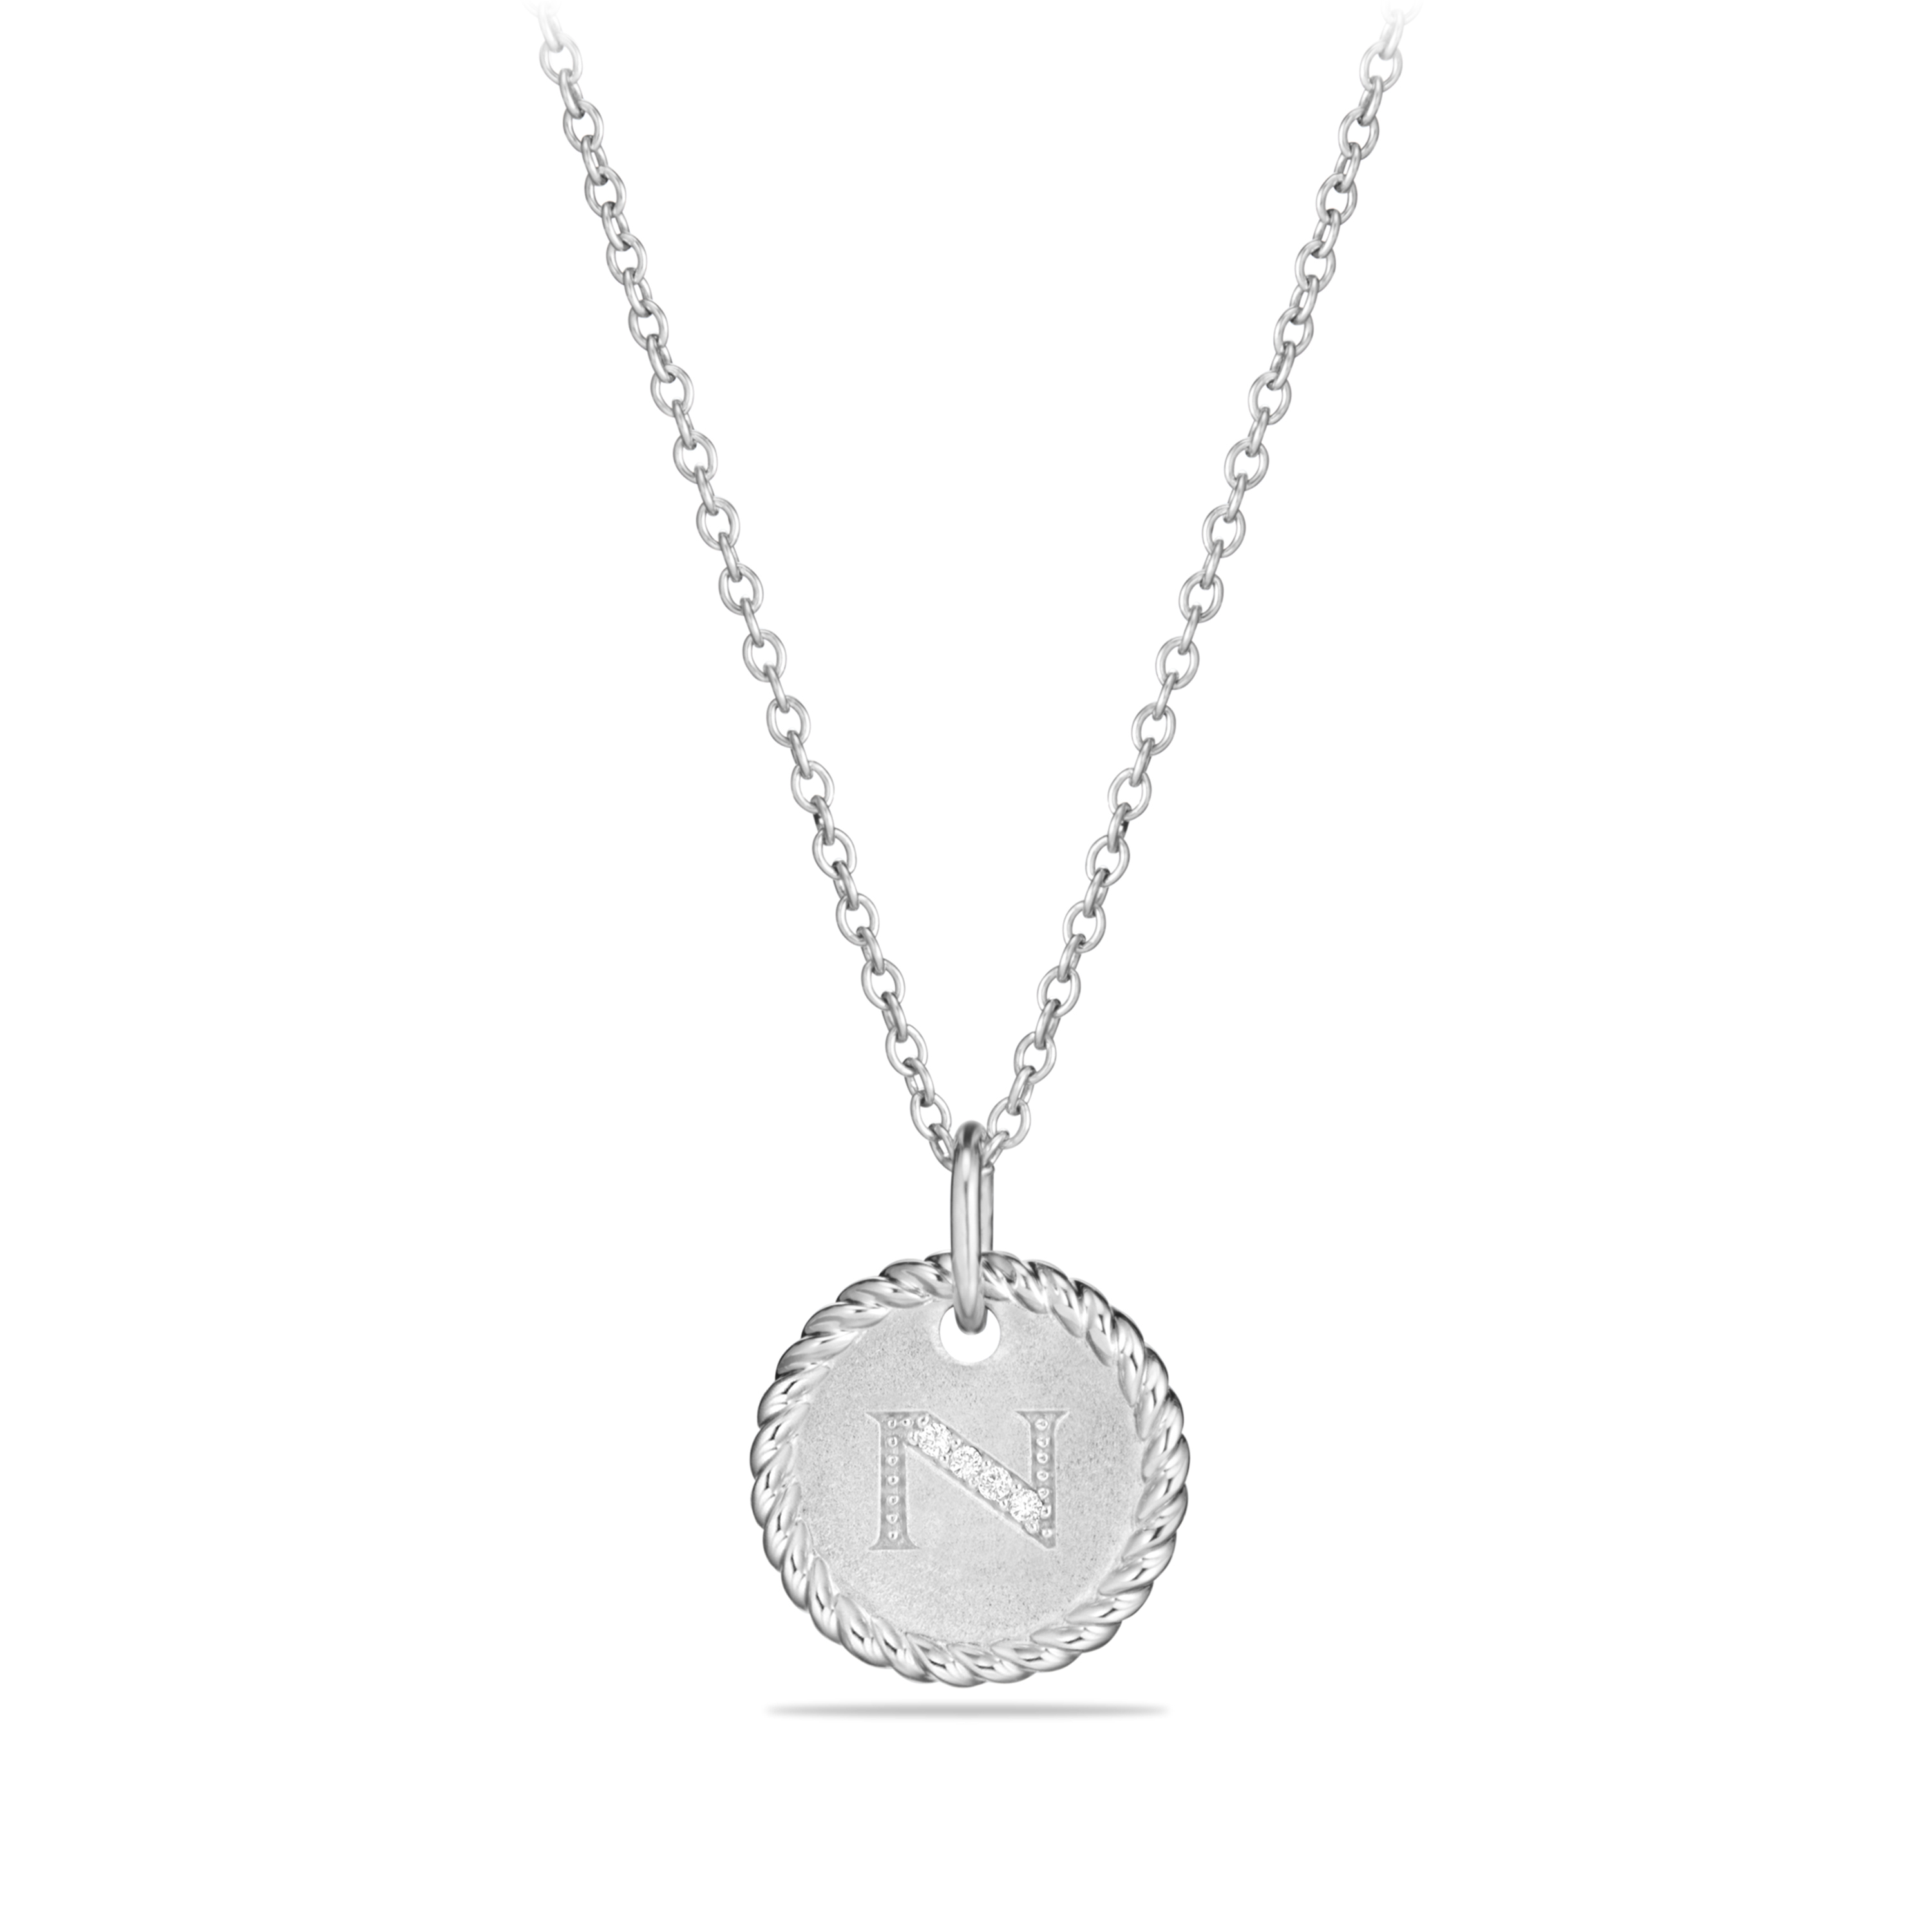 N Initial Charm Necklace in 18K White Gold with Pave Diamonds